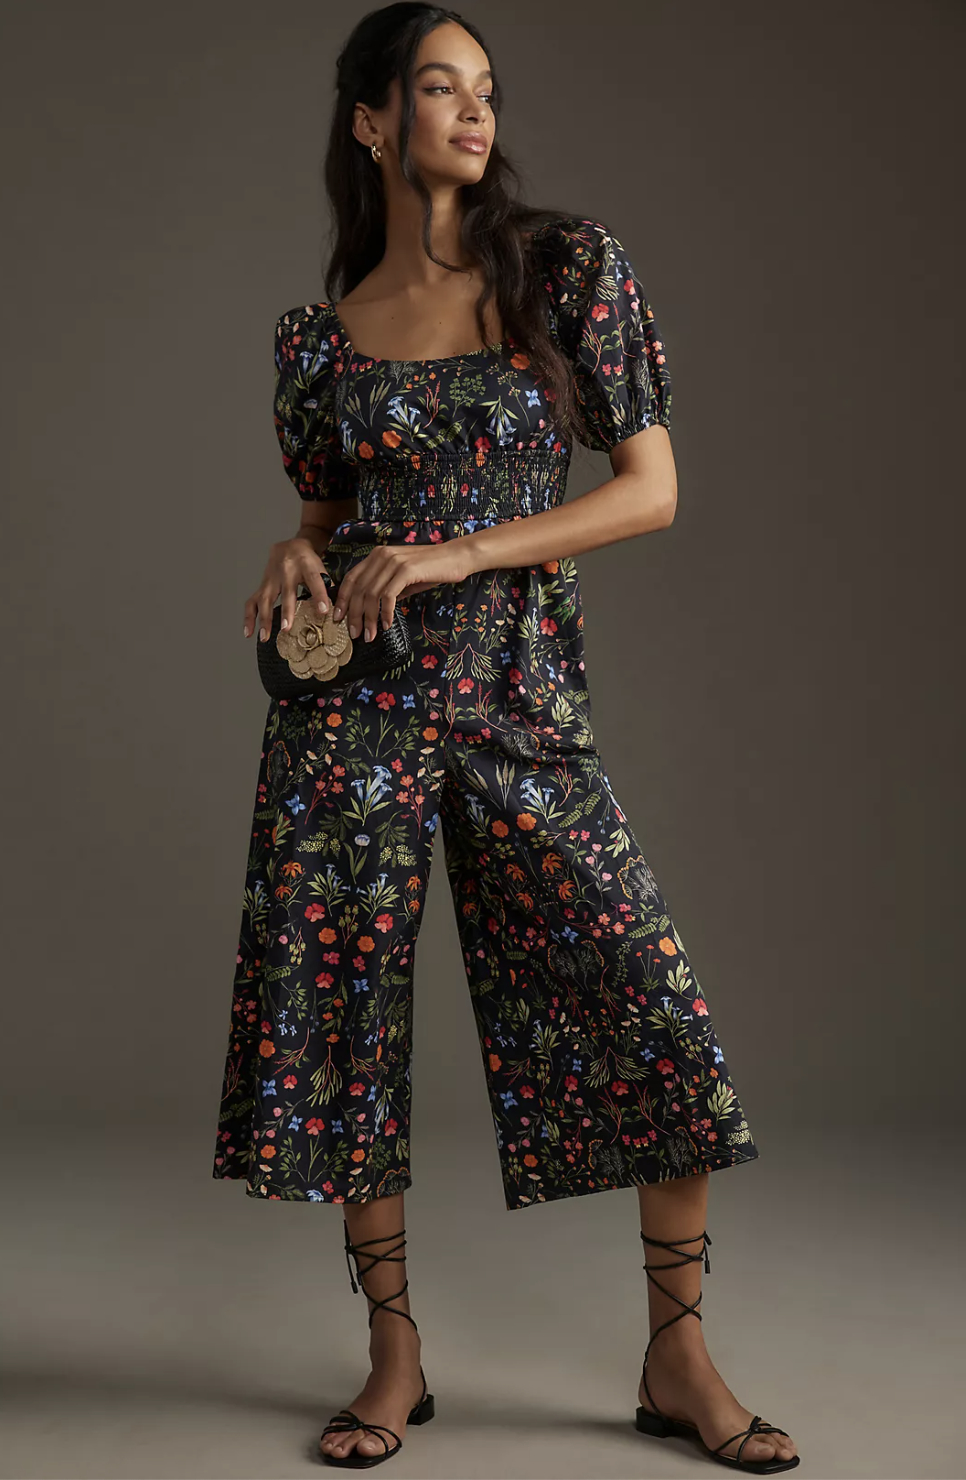 Woman in floral cropped top and culottes holding a small purse, standing in a model pose